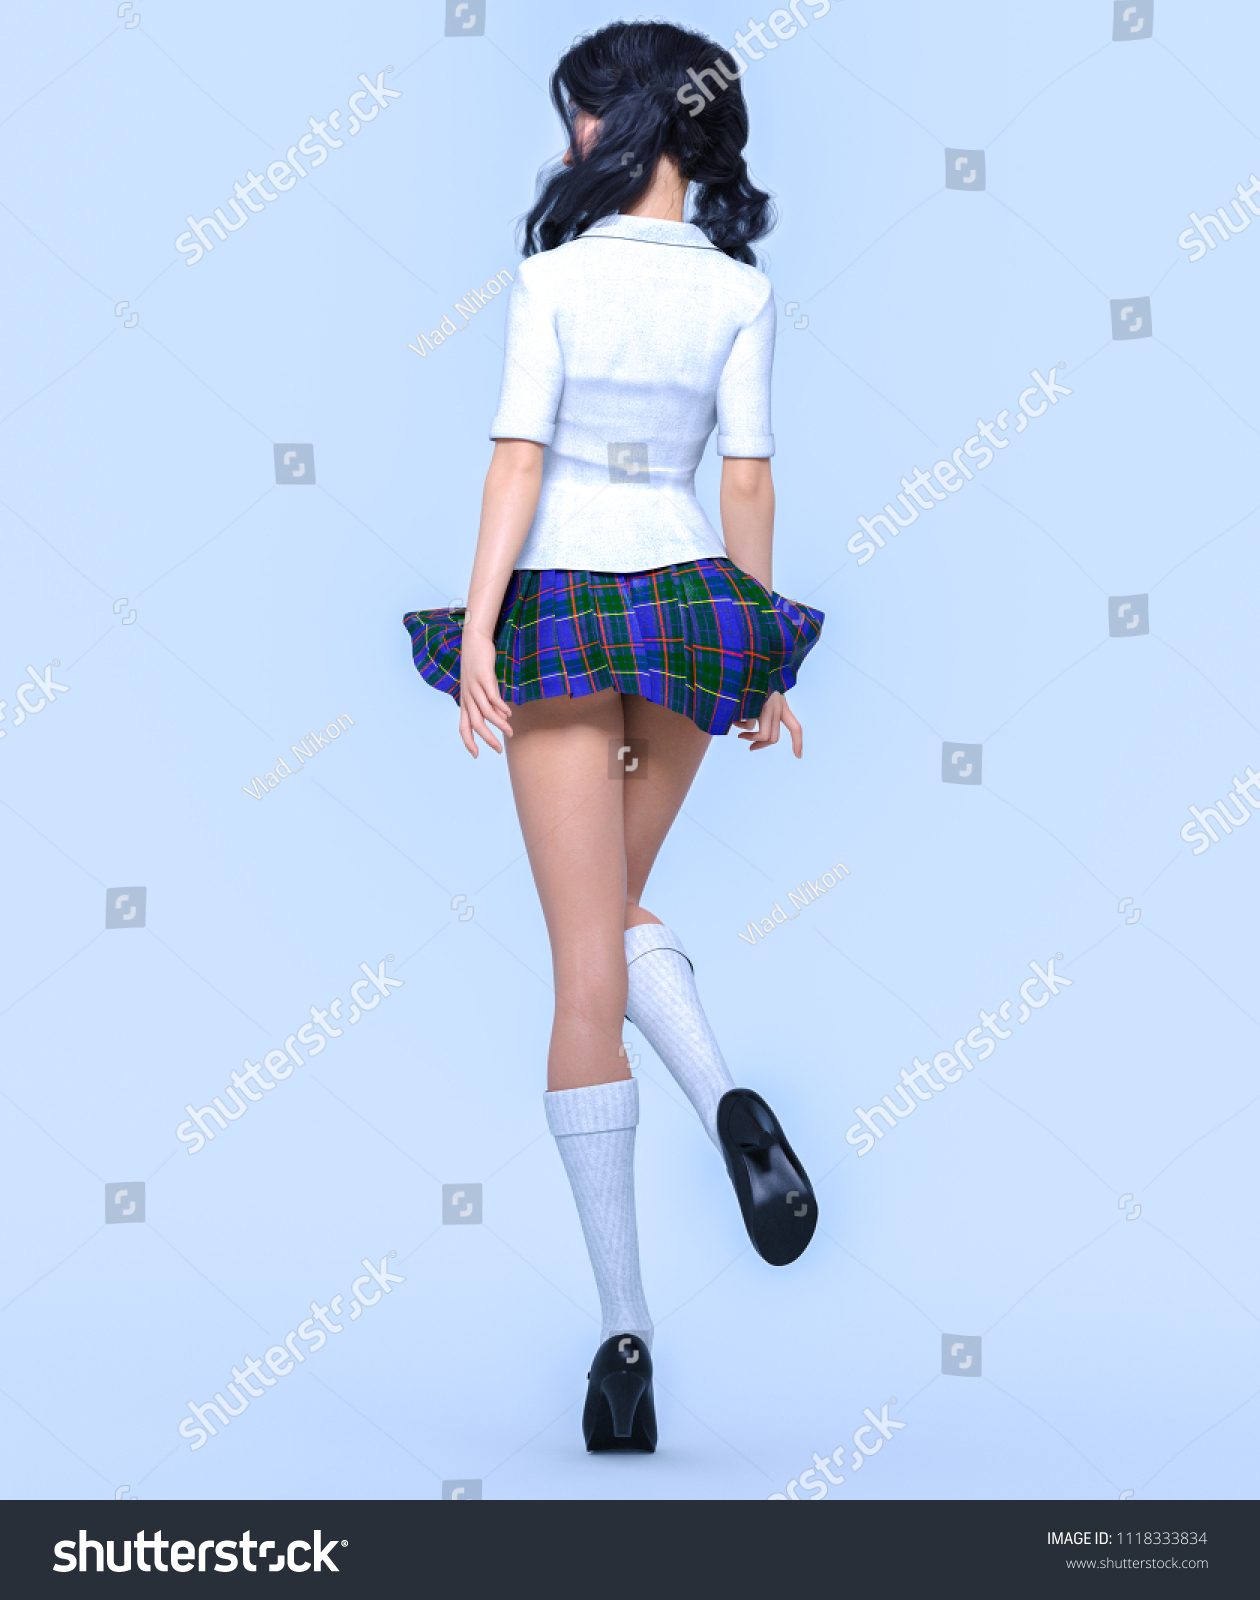 alexa valentino recommends up skirt at school pic